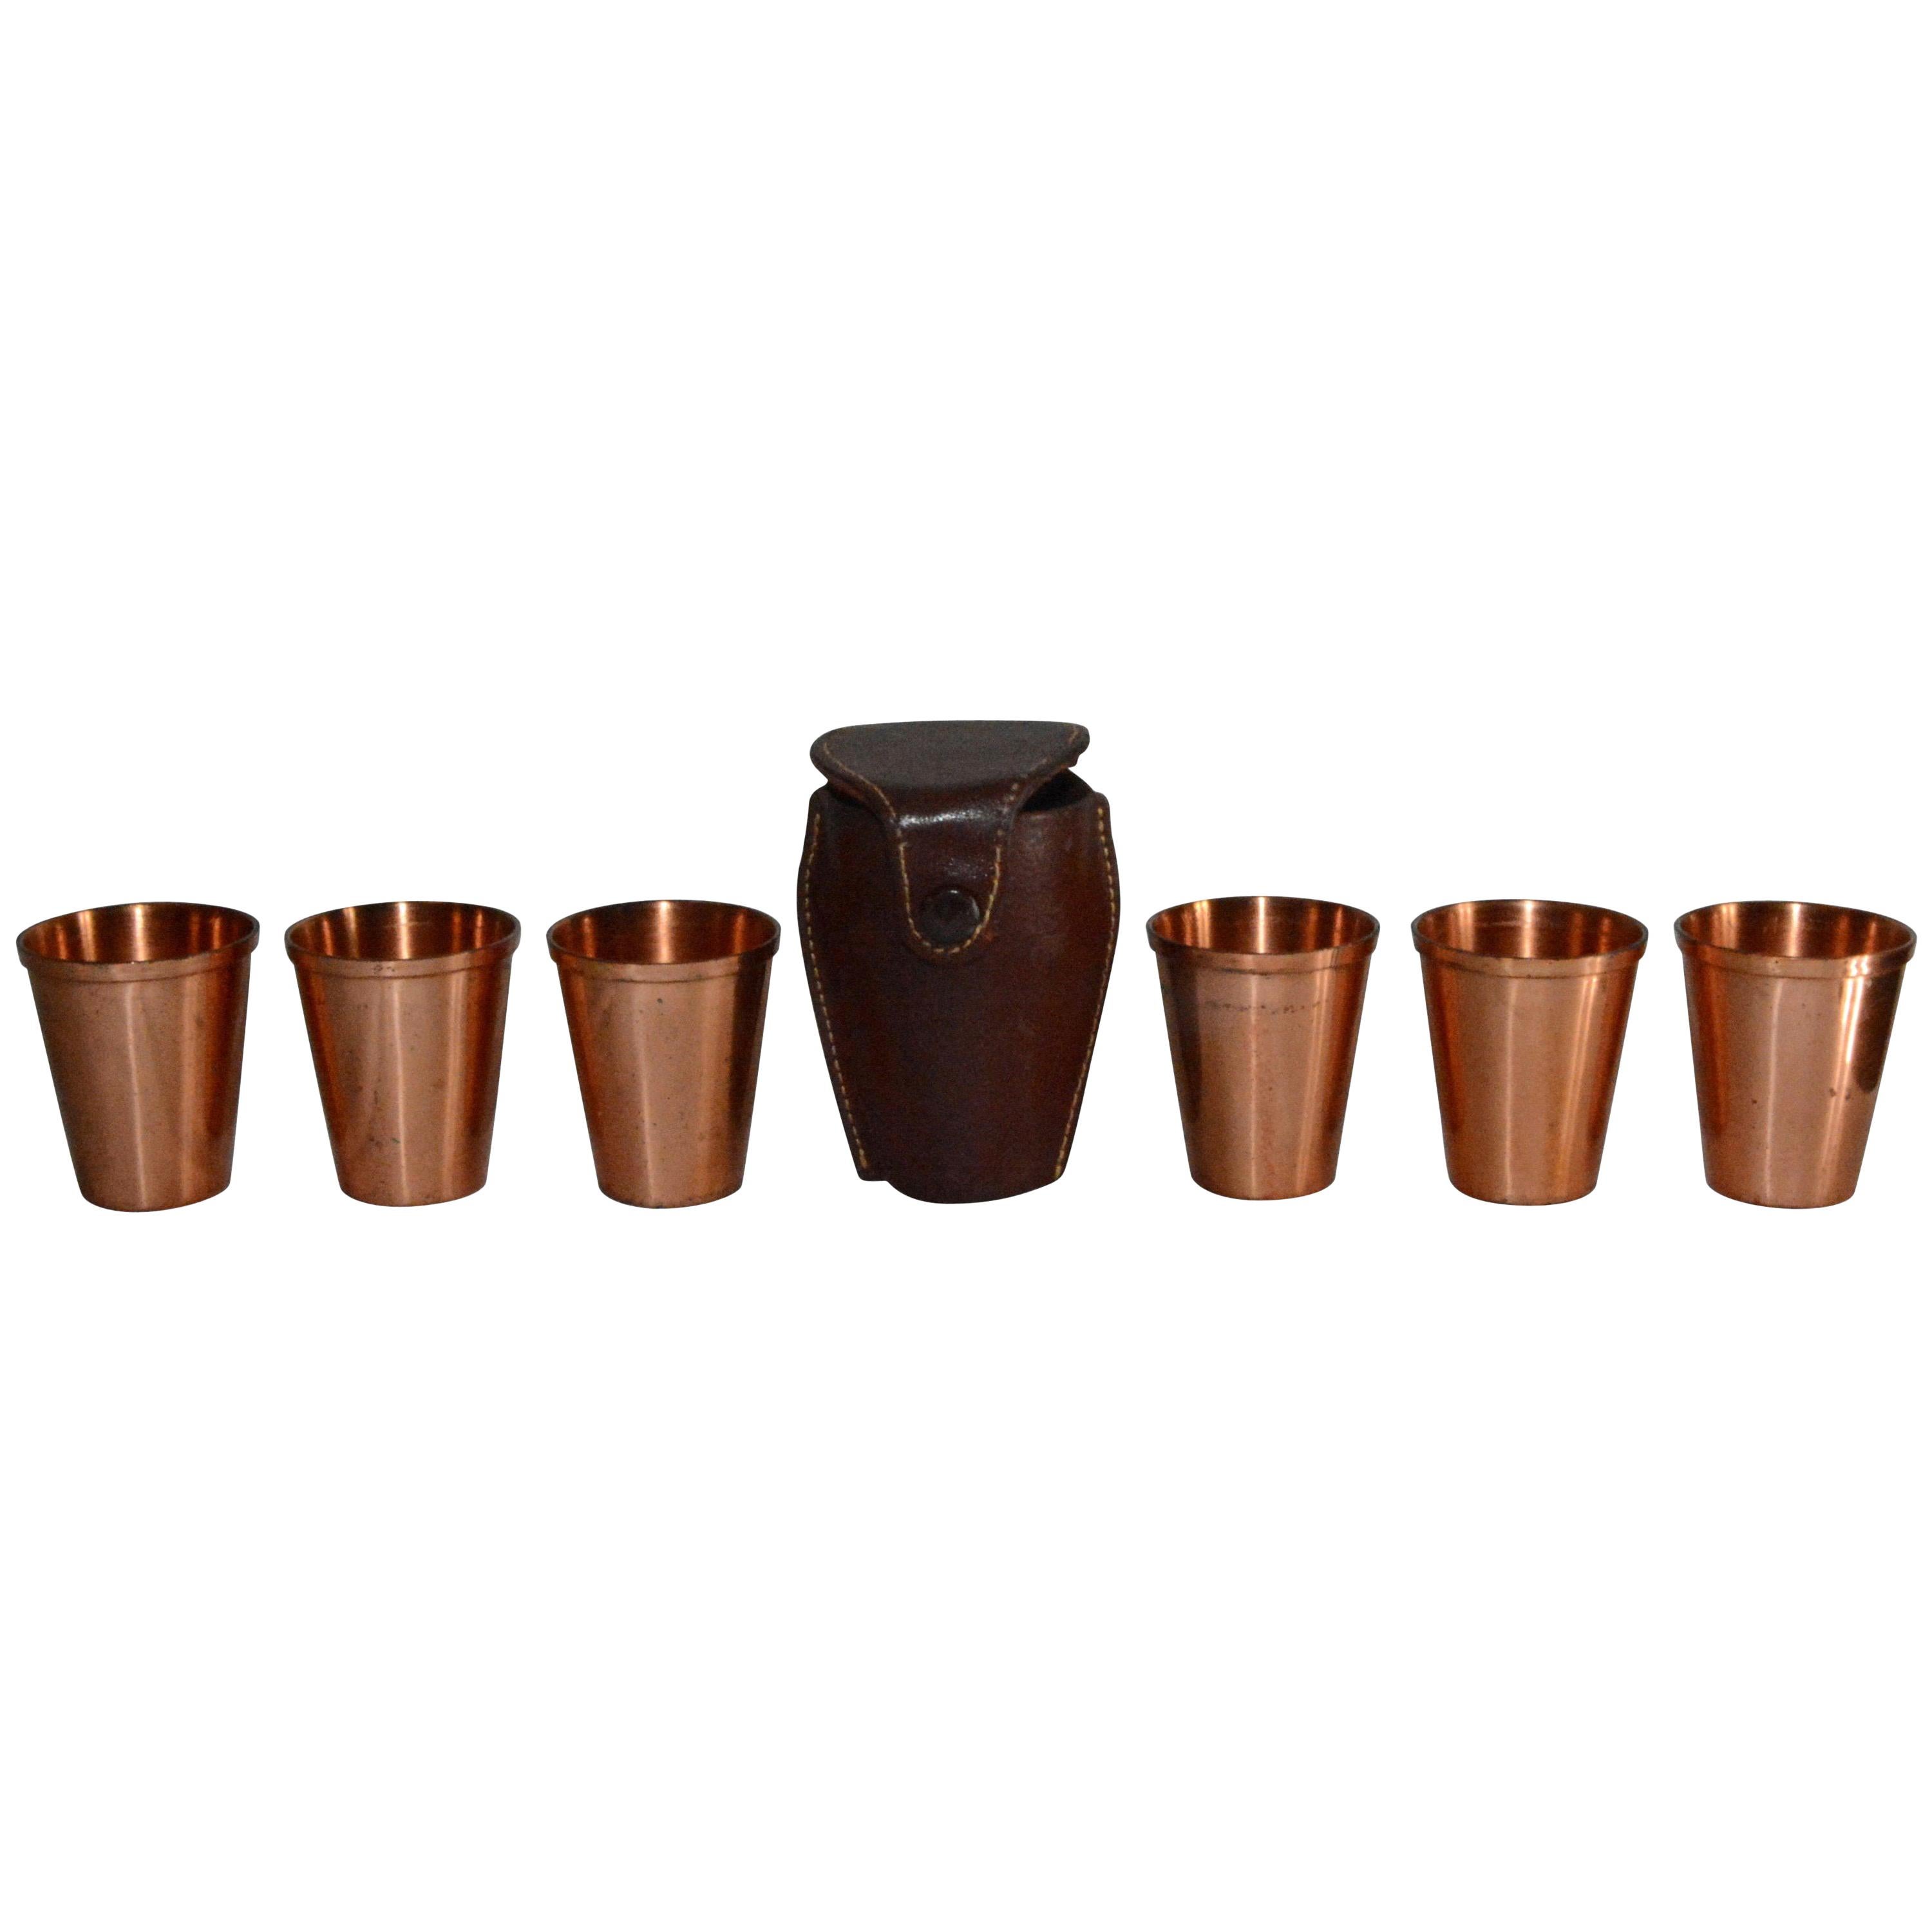 Copper Shot Glasses in Leather Travel Case by West Bend, Mid-Century Modern For Sale